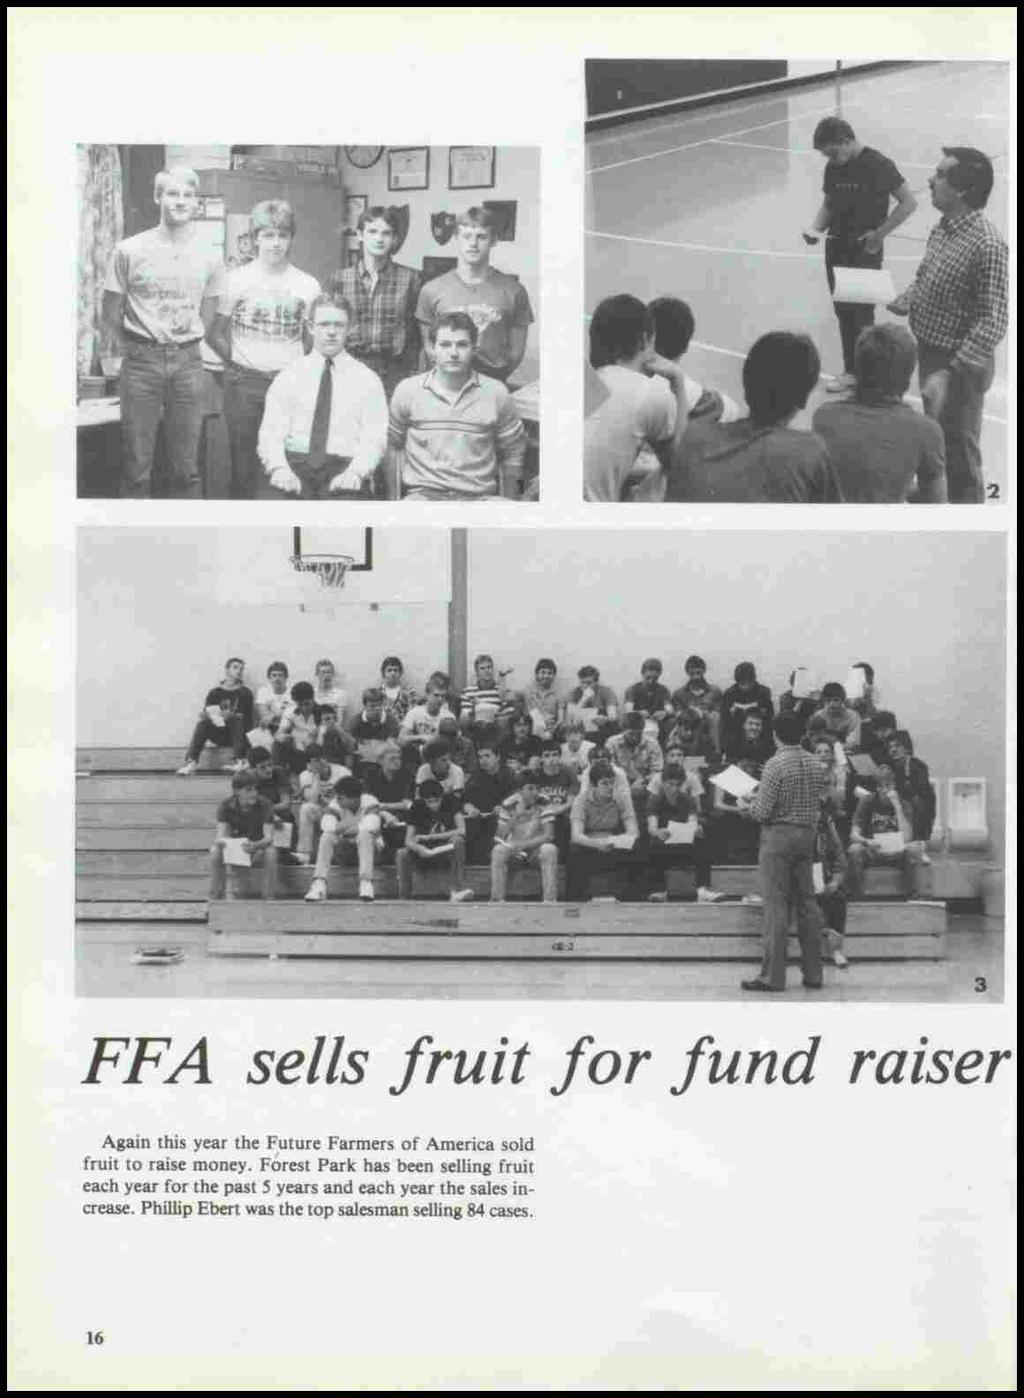 FF A sells fruit for fund razser Again this year the Future Farmers of America sold fruit to raise money.